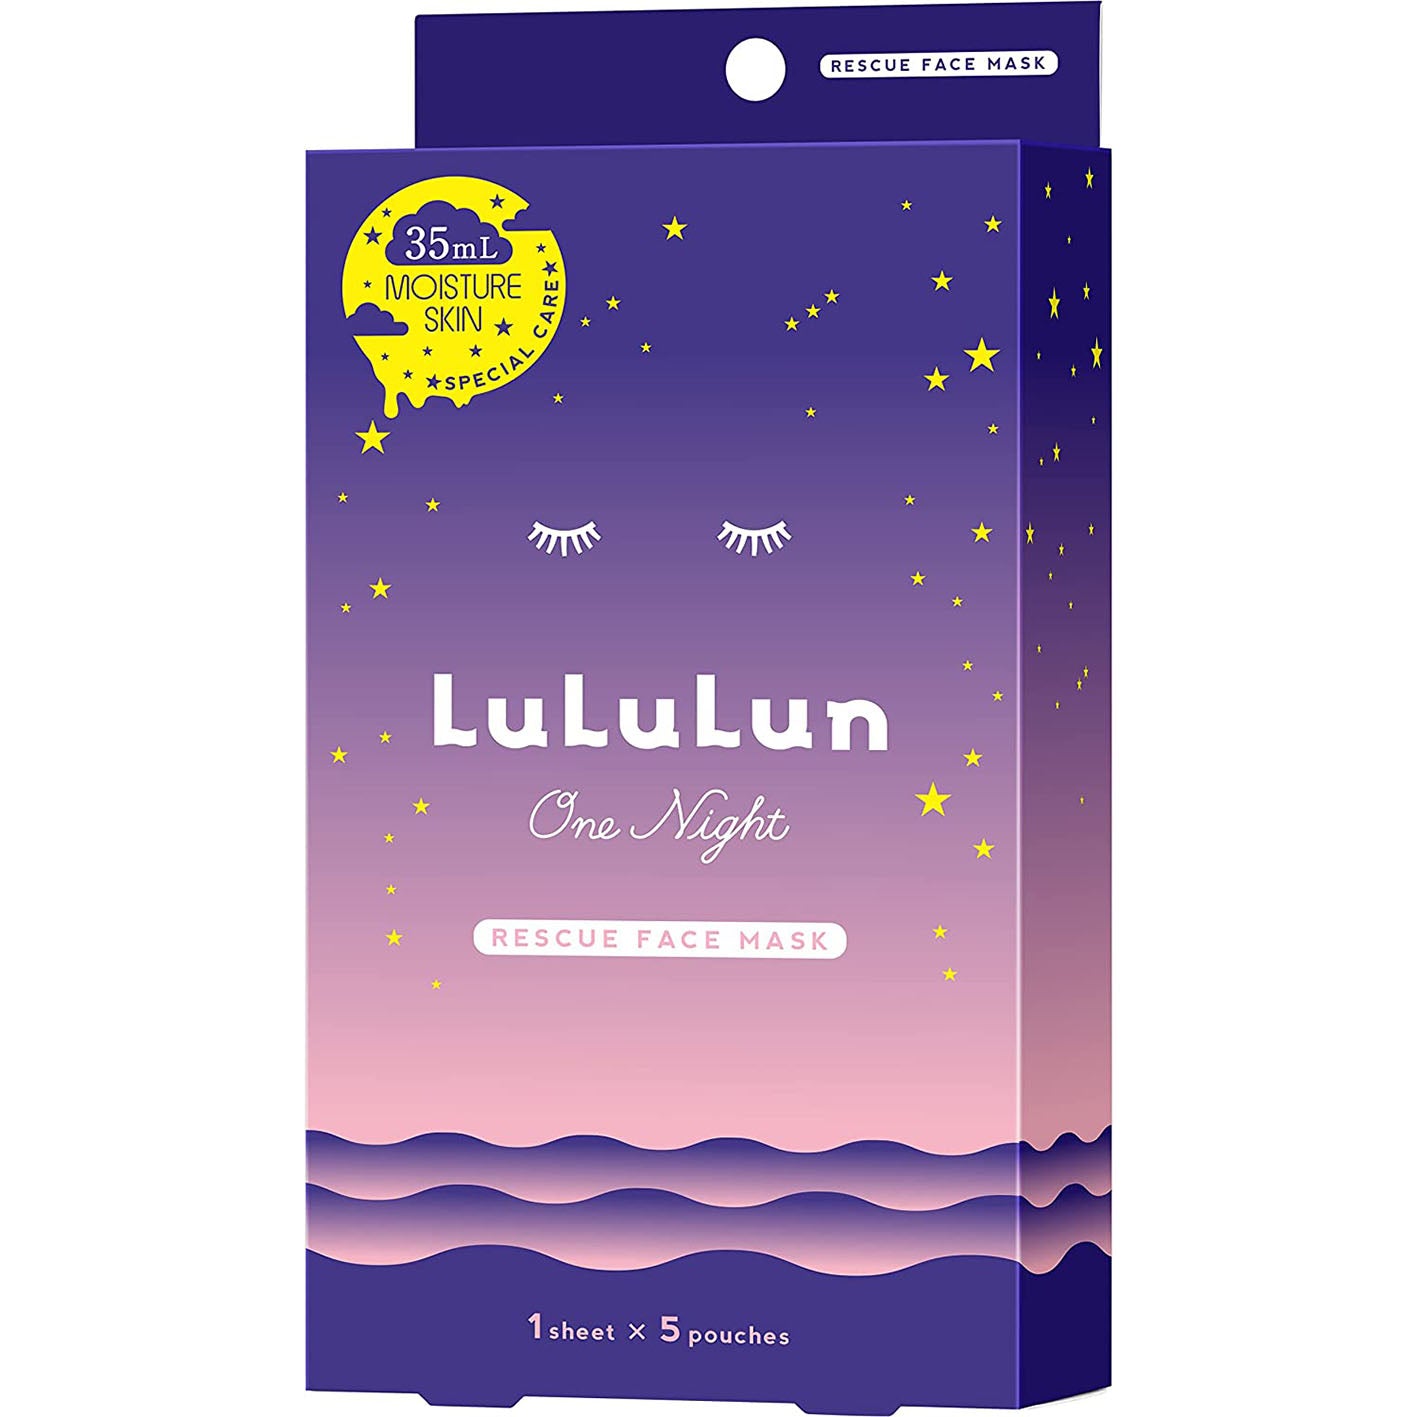 Lululun One Night Rescue Moisturizing Face Mask 5psc - Harajuku Culture Japan - Japanease Products Store Beauty and Stationery